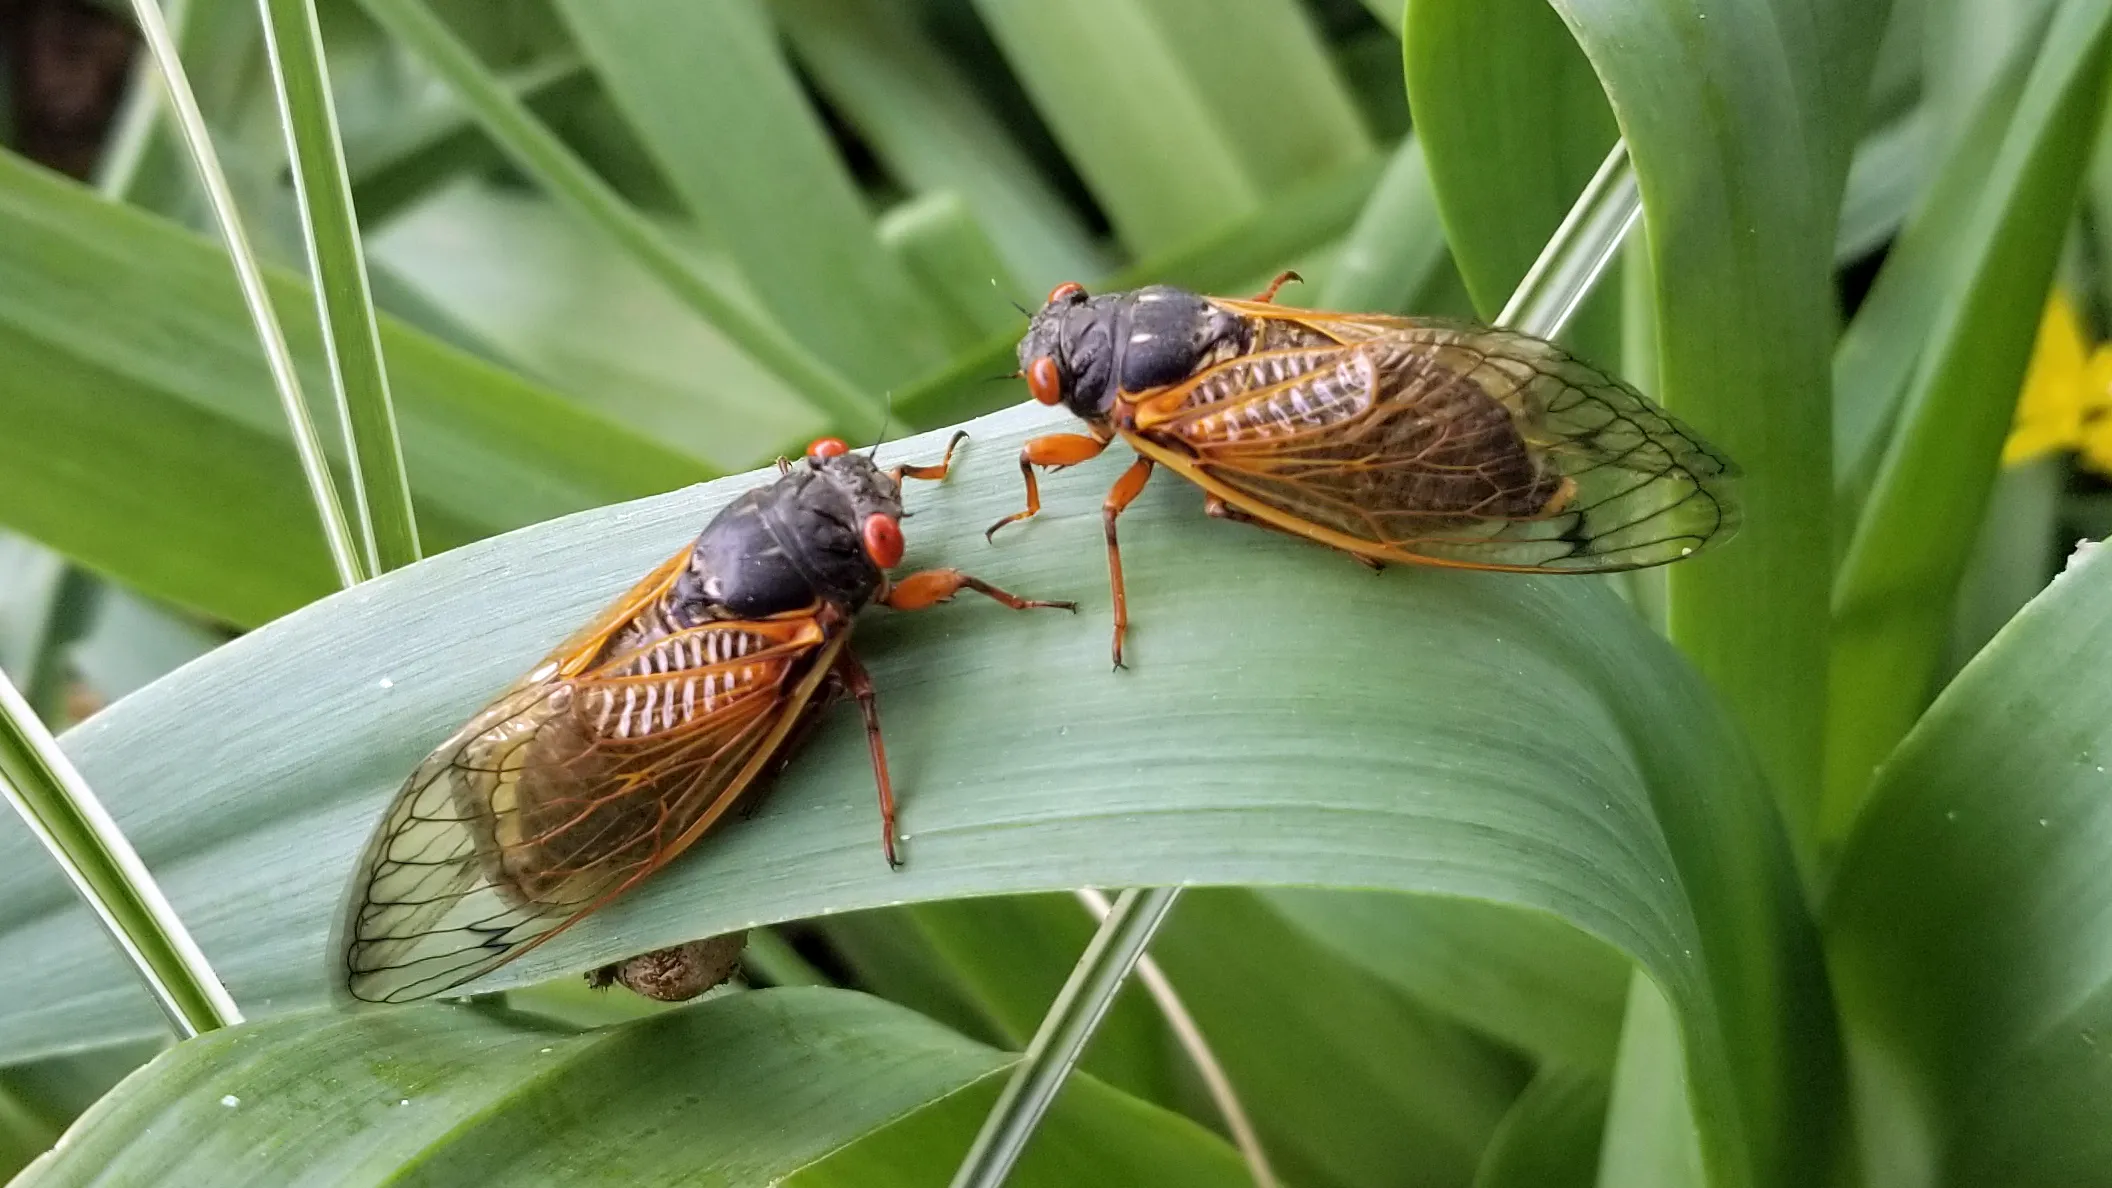 The Cicada Invasion: What to Expect and How to Prepare